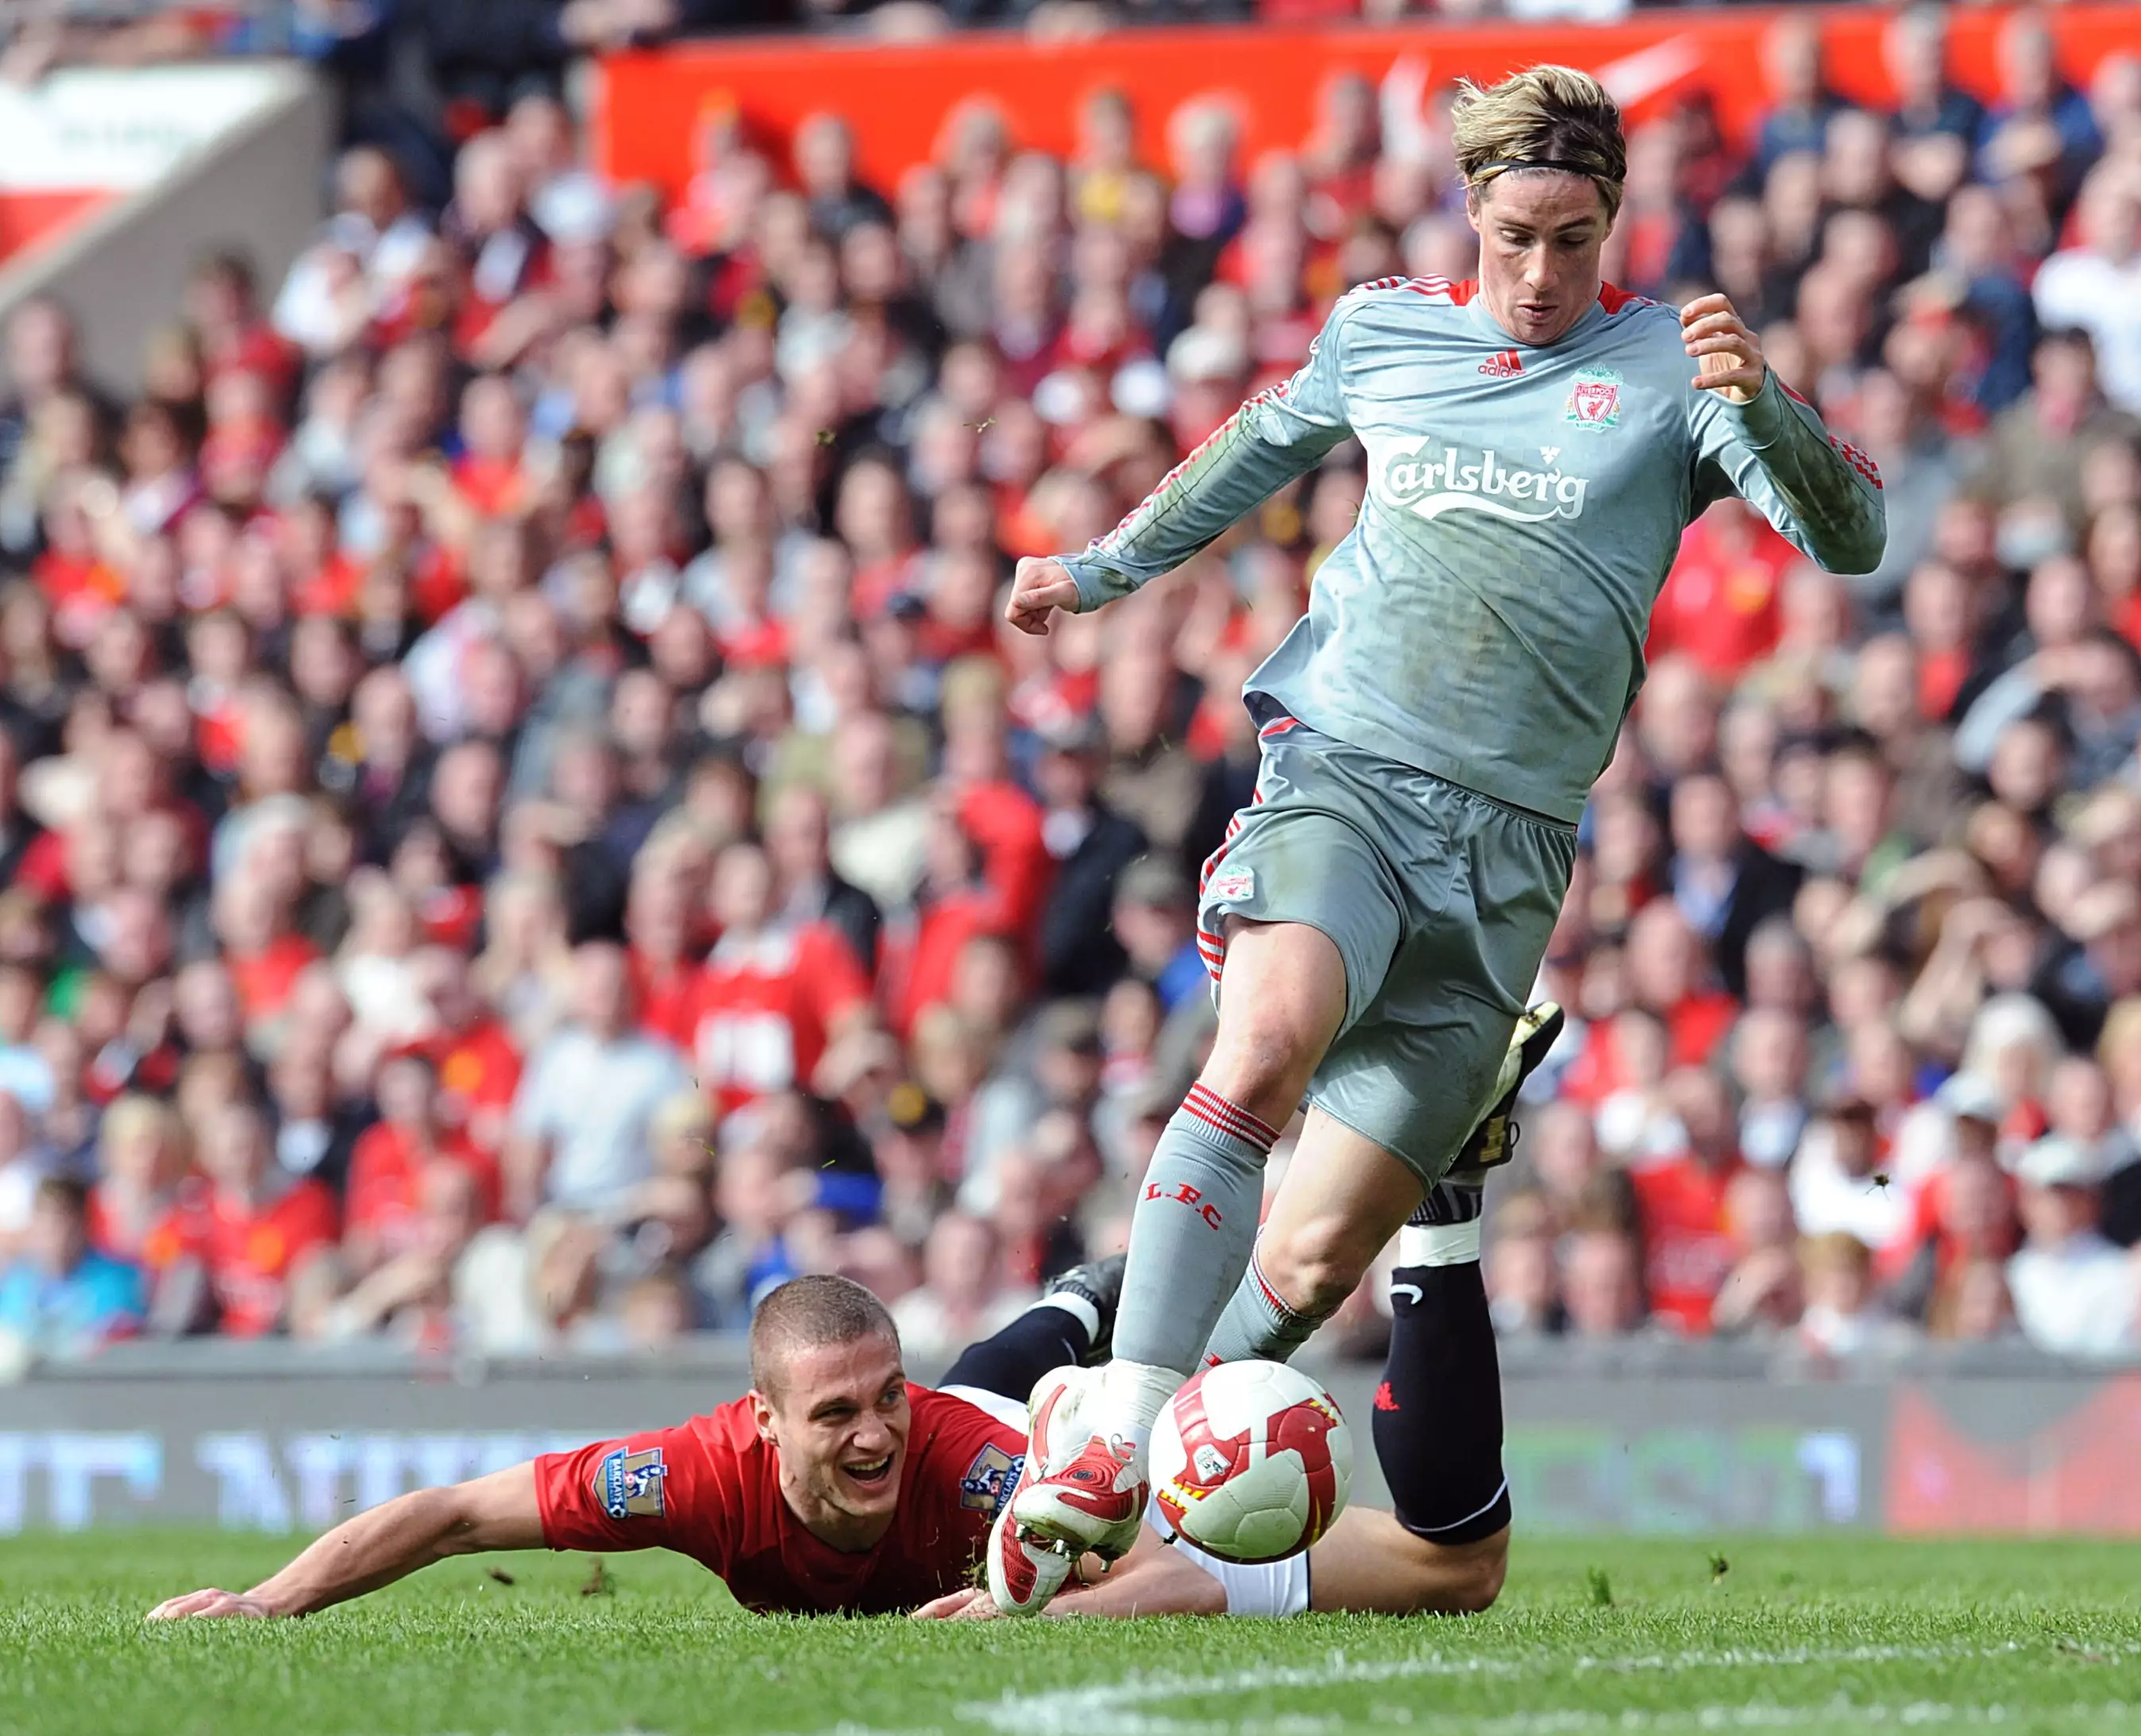 Vidic channelling his inner Jones as Torres runs away from him. Image: PA Images